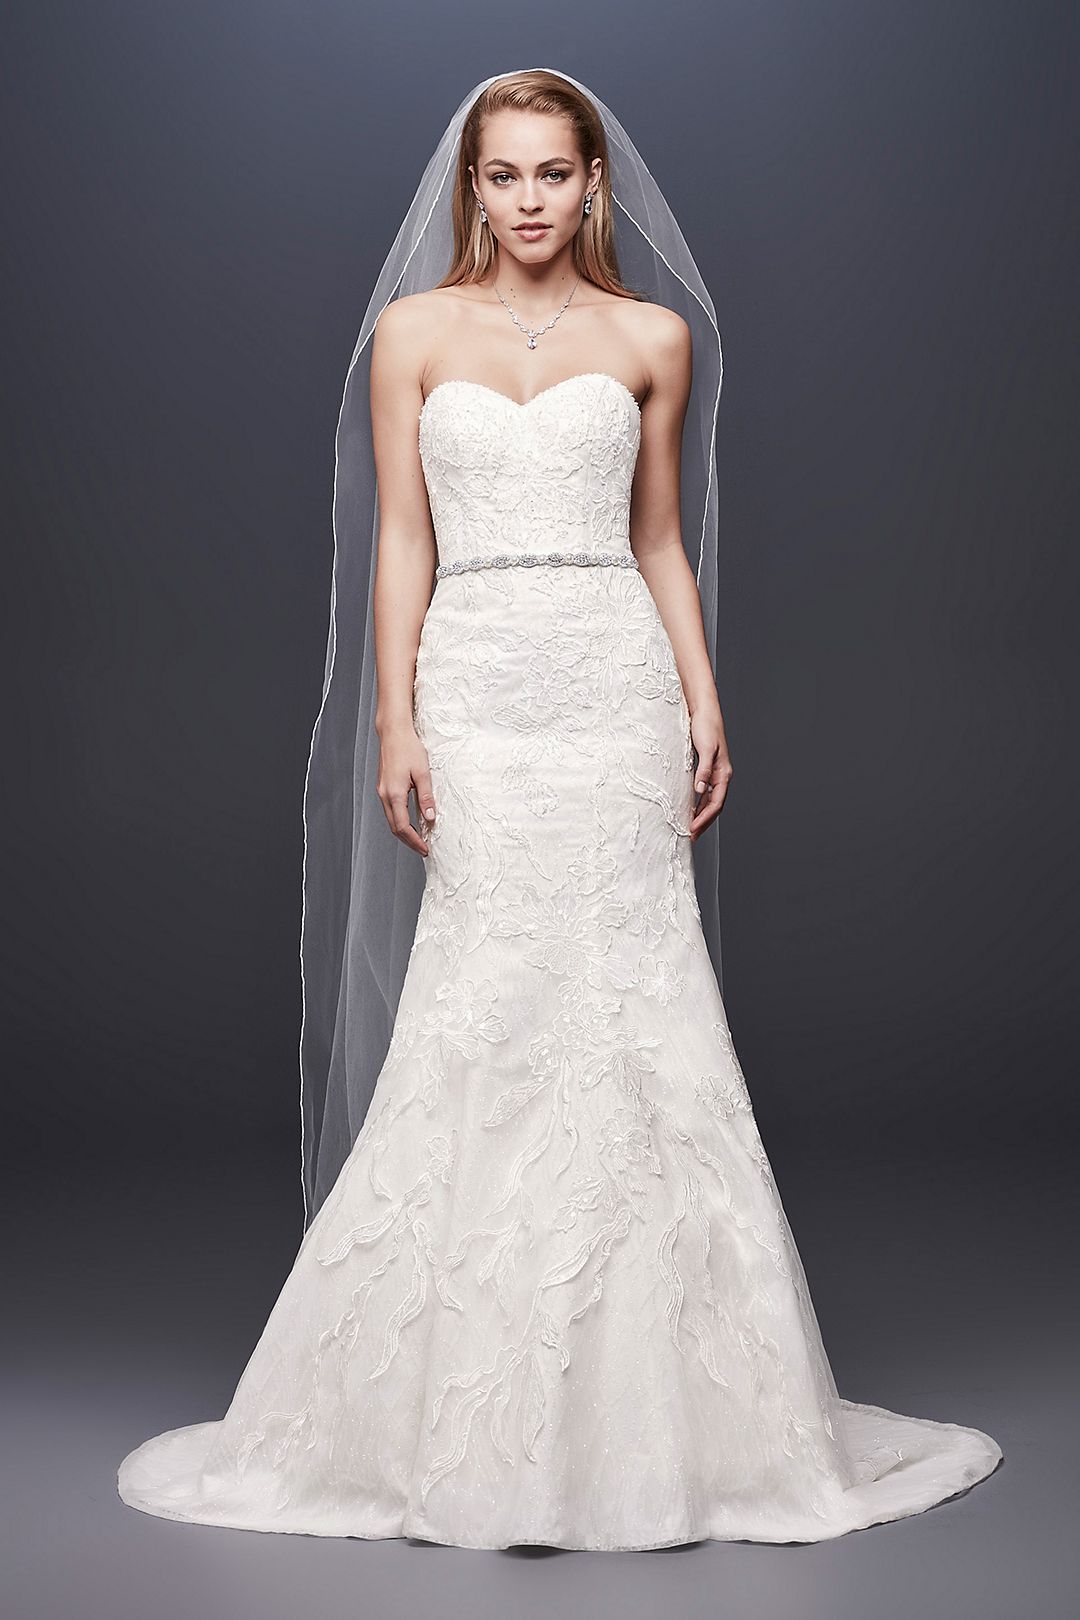 As-Is Beaded Lace Strapless Mermaid Wedding Dress Image 1